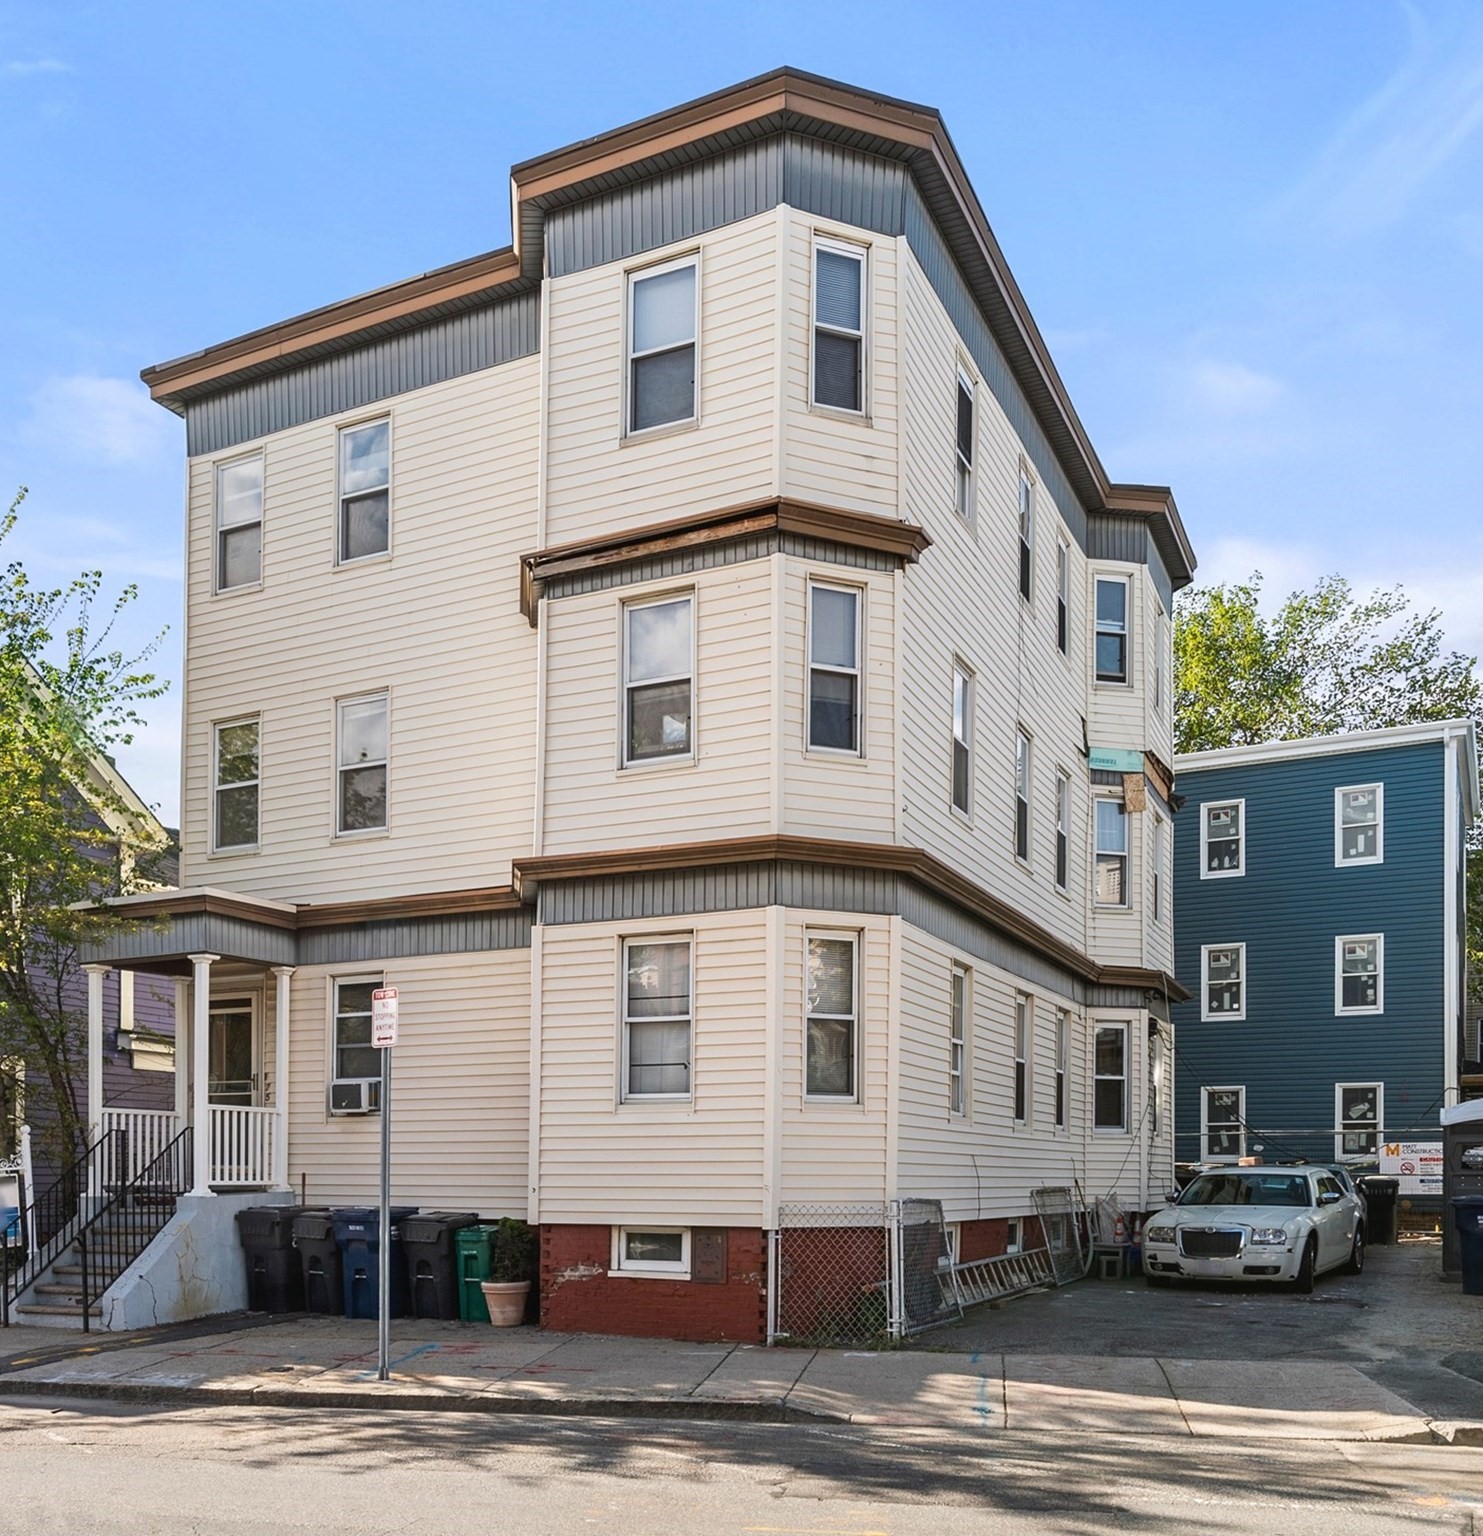 Photos of apartment on Fayette St.,Cambridge MA 02139